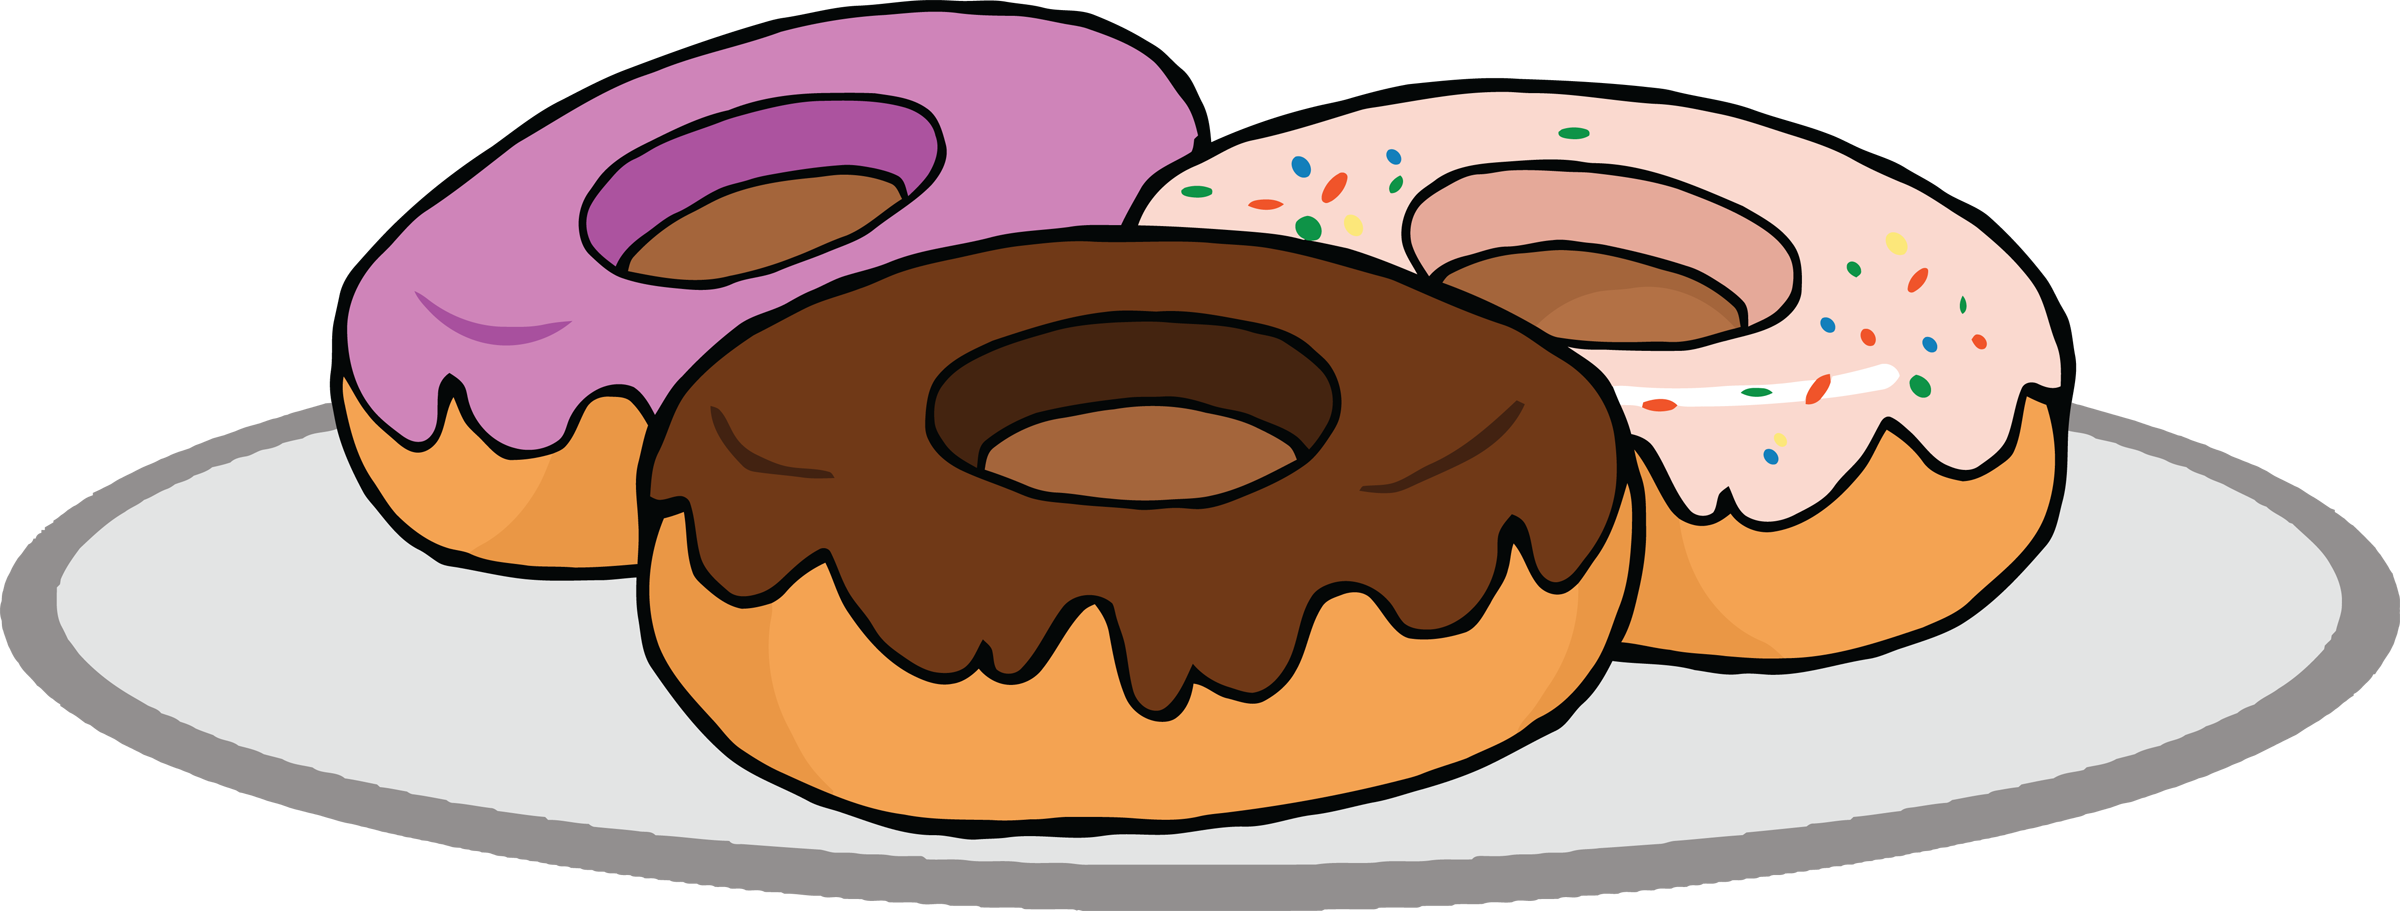 Donuts Clipart Image: Clipart